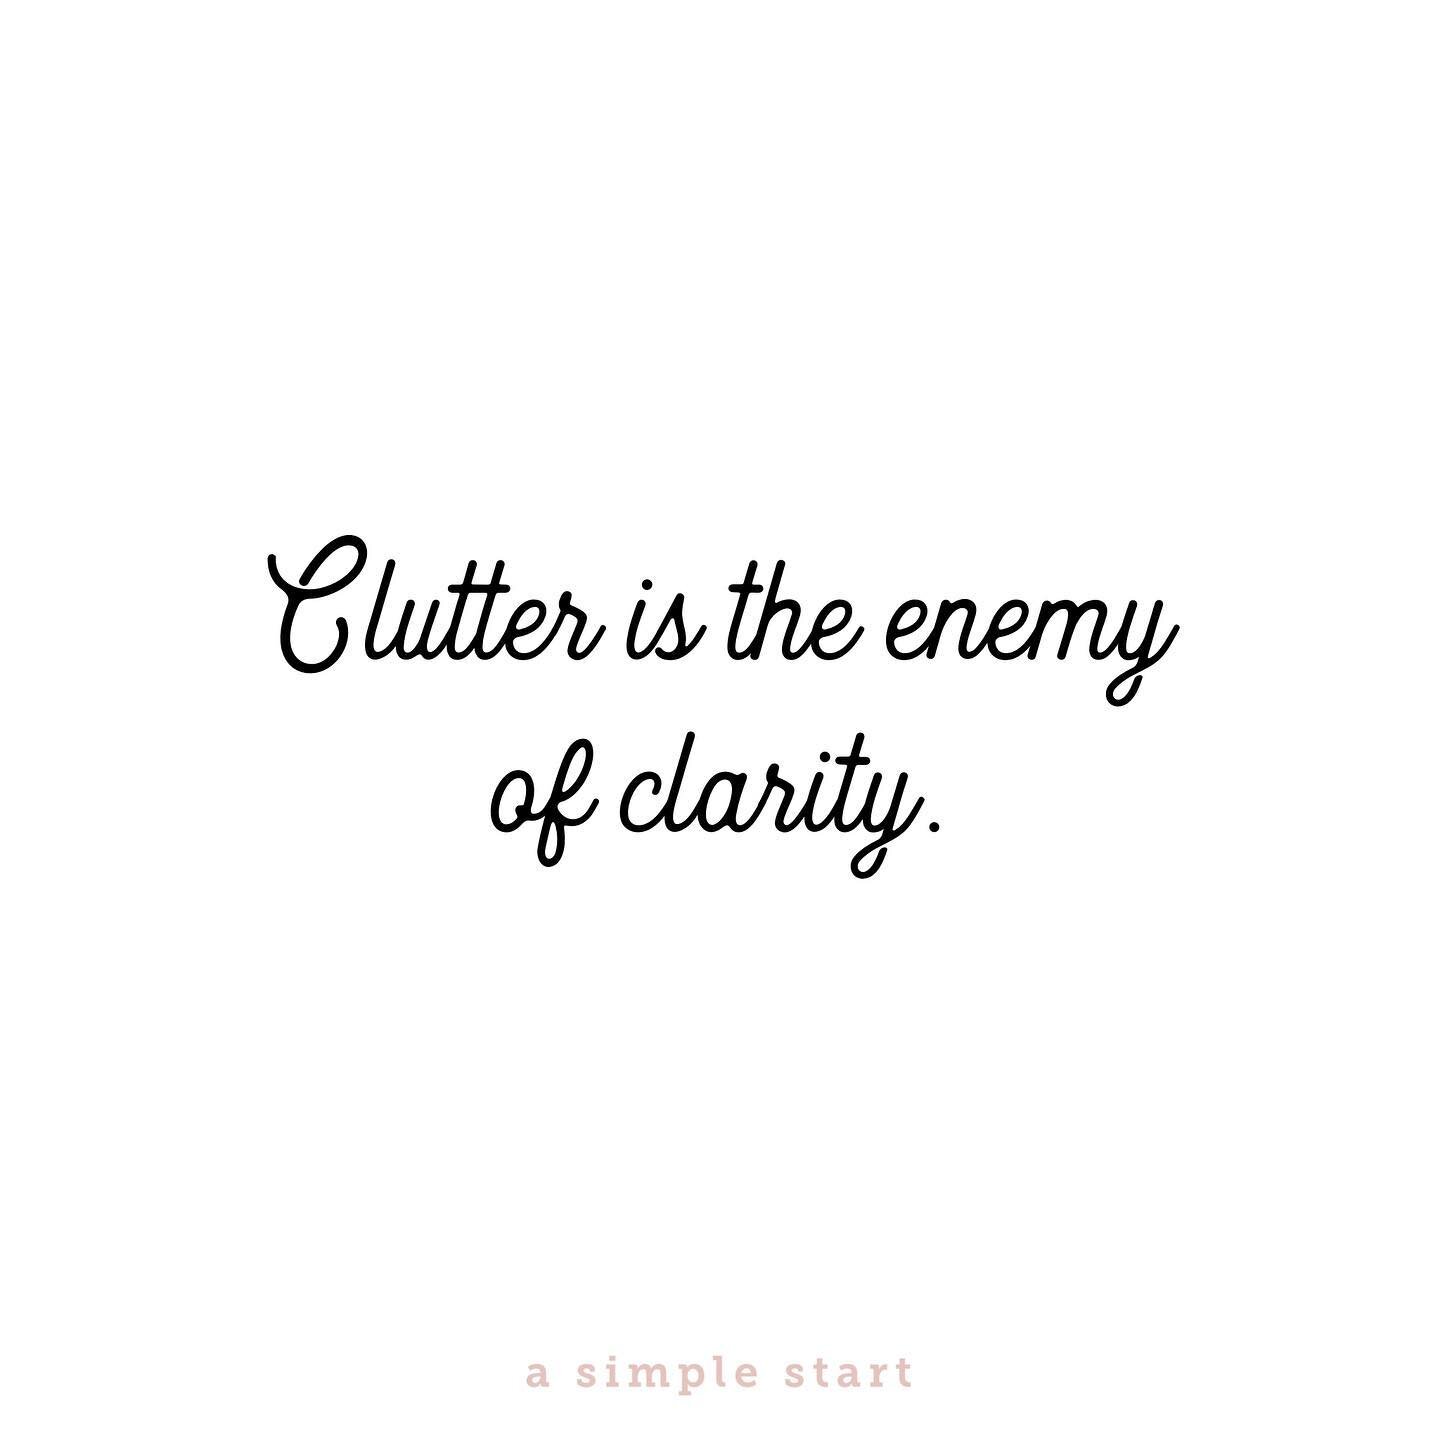 &ldquo;When our lives are cluttered, whether it&rsquo;s emotional, physical, or intellectual, that clutter edges out any space we need in order to process. And that space is what we need to gain clarity.&rdquo; -@emilyley 
🤍🤍🤍
Let&rsquo;s all work